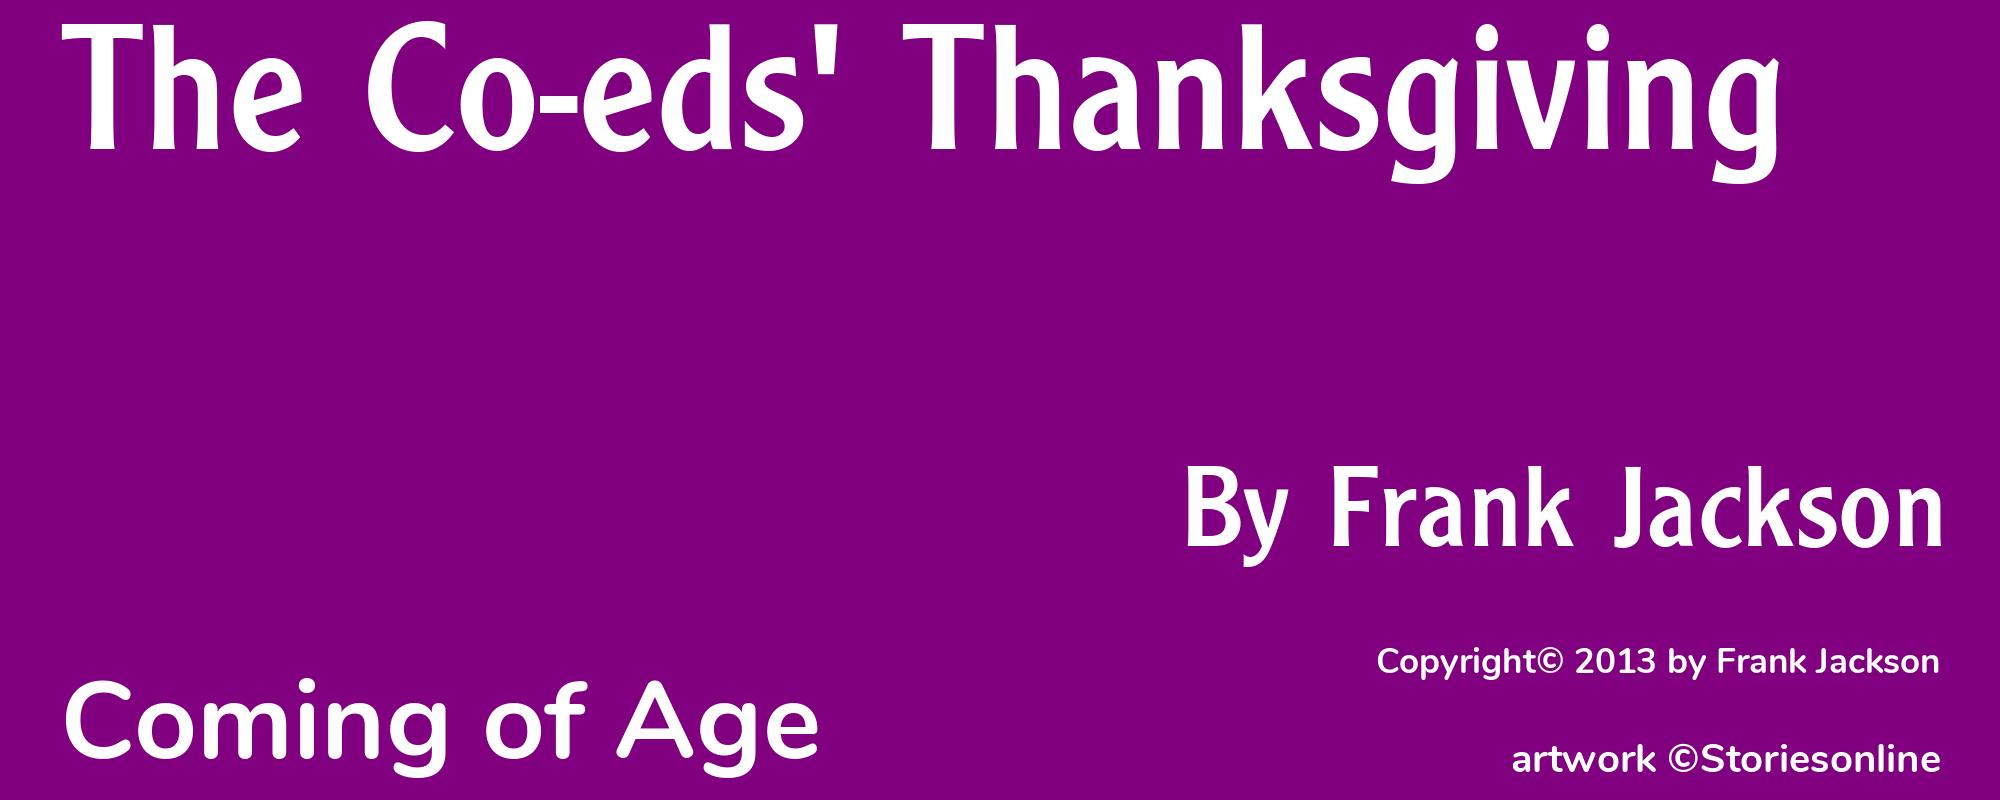 The Co-eds' Thanksgiving - Cover